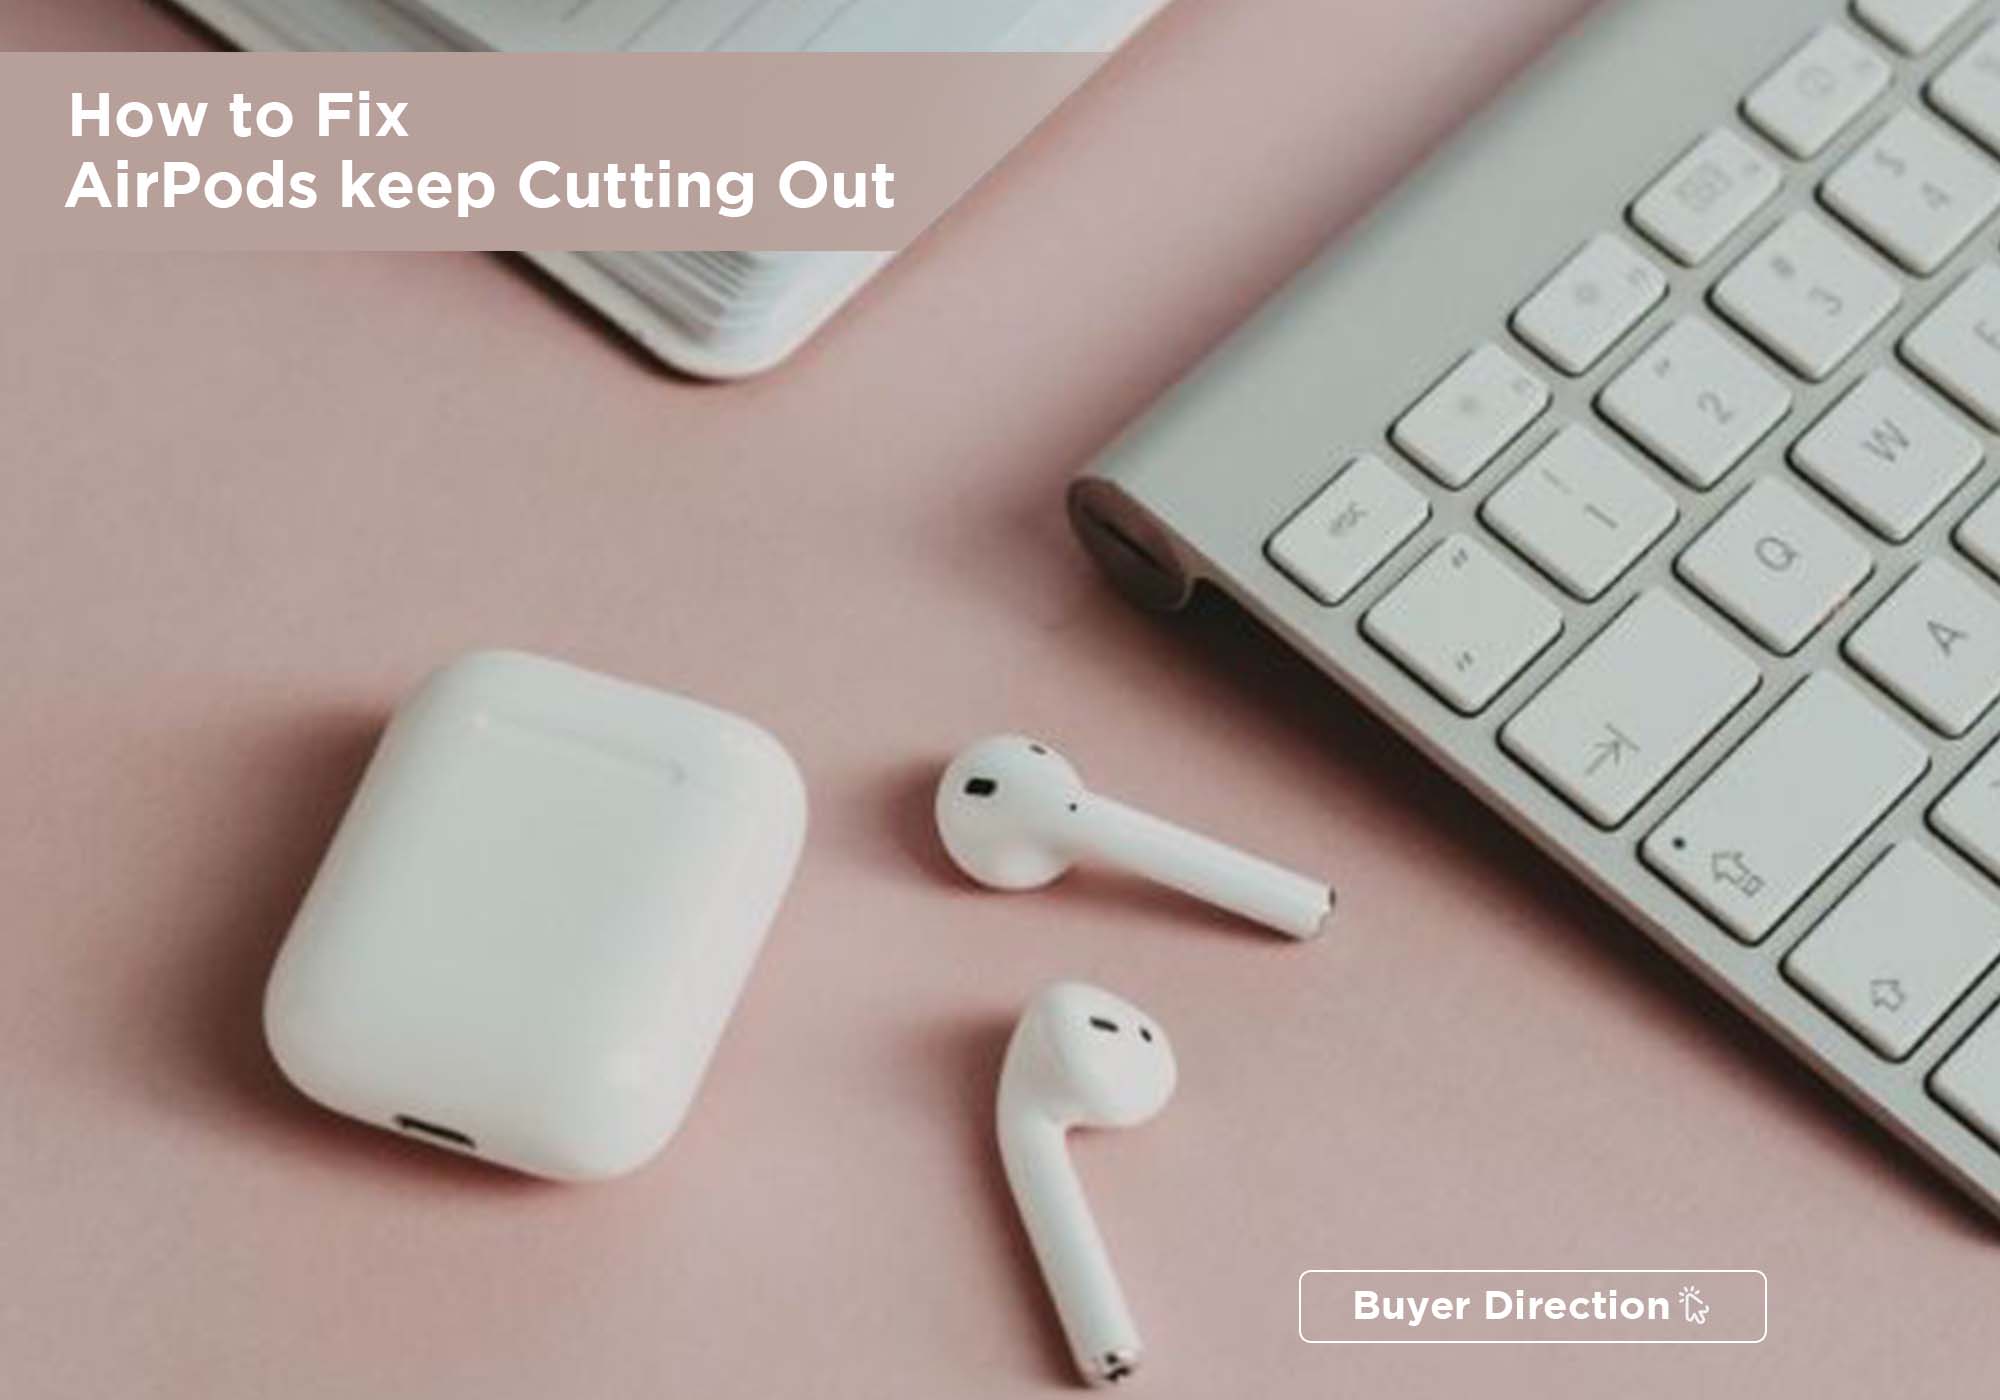 How to Fix AirPods keep Cutting Out